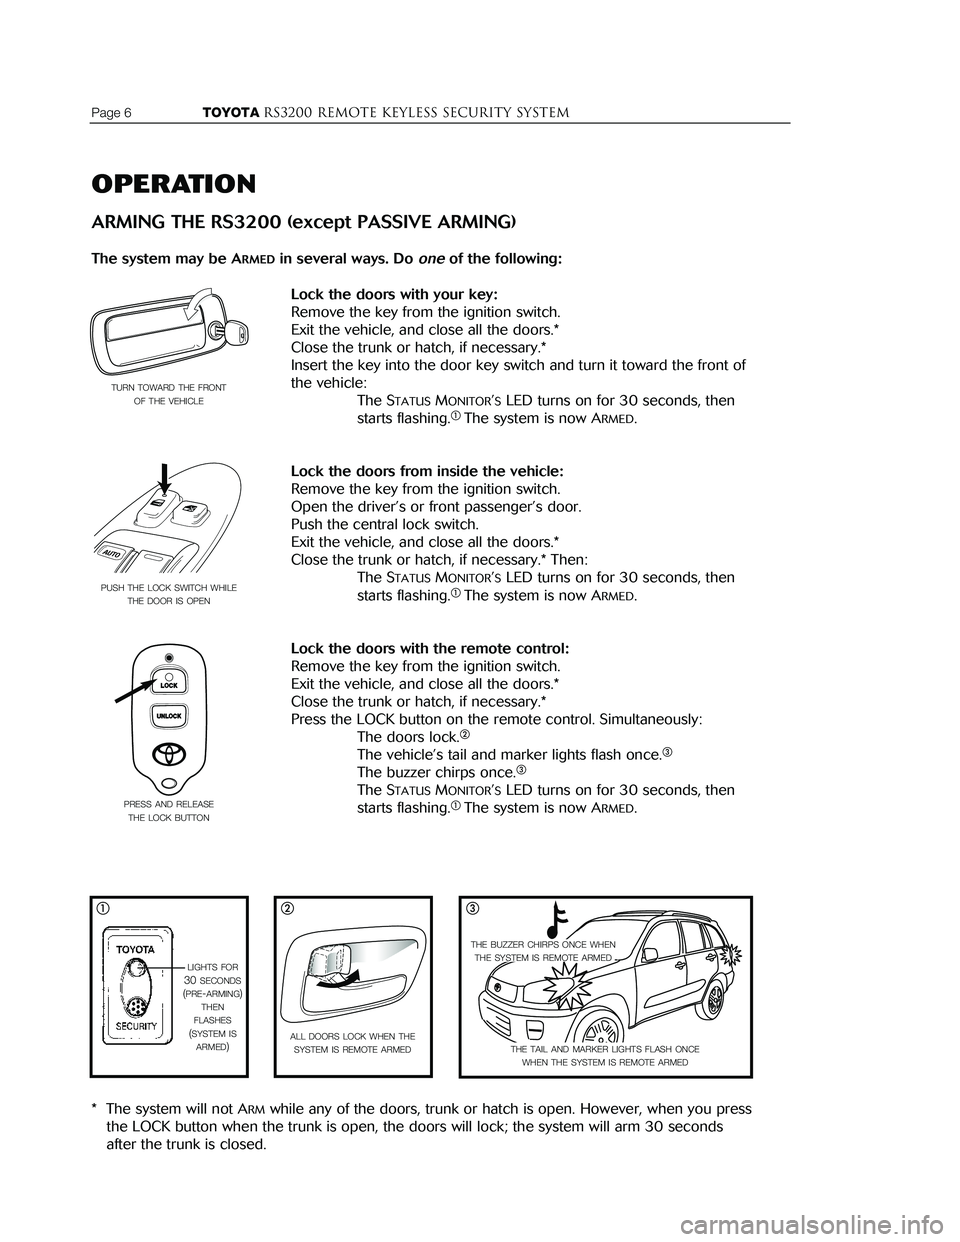 TOYOTA ECHO 2000  Accessories, Audio & Navigation (in English) Page 6                  TOYOTARS3200 REMOTE KEYLESS Security systemTOYOTARS3200 remote keyless Security systemPage 15
OPERATION
ARMING THE RS3200 (except PASSIVE ARMING)
The system may be ARMEDin seve